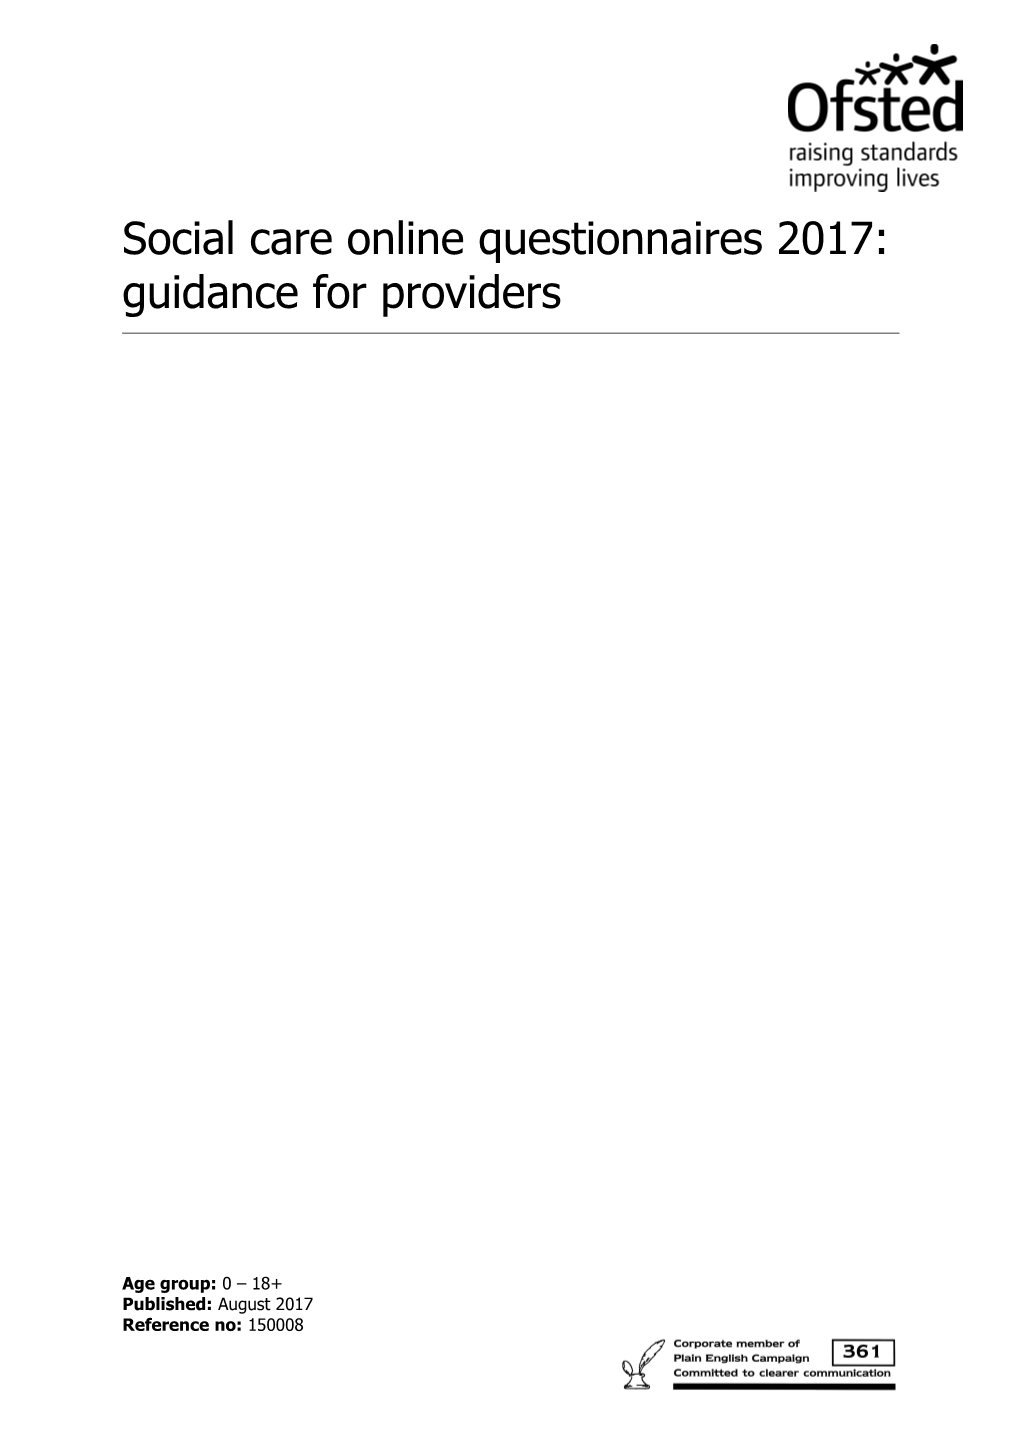 Social Care Online Questionnaires 2017: Guidance for Providers